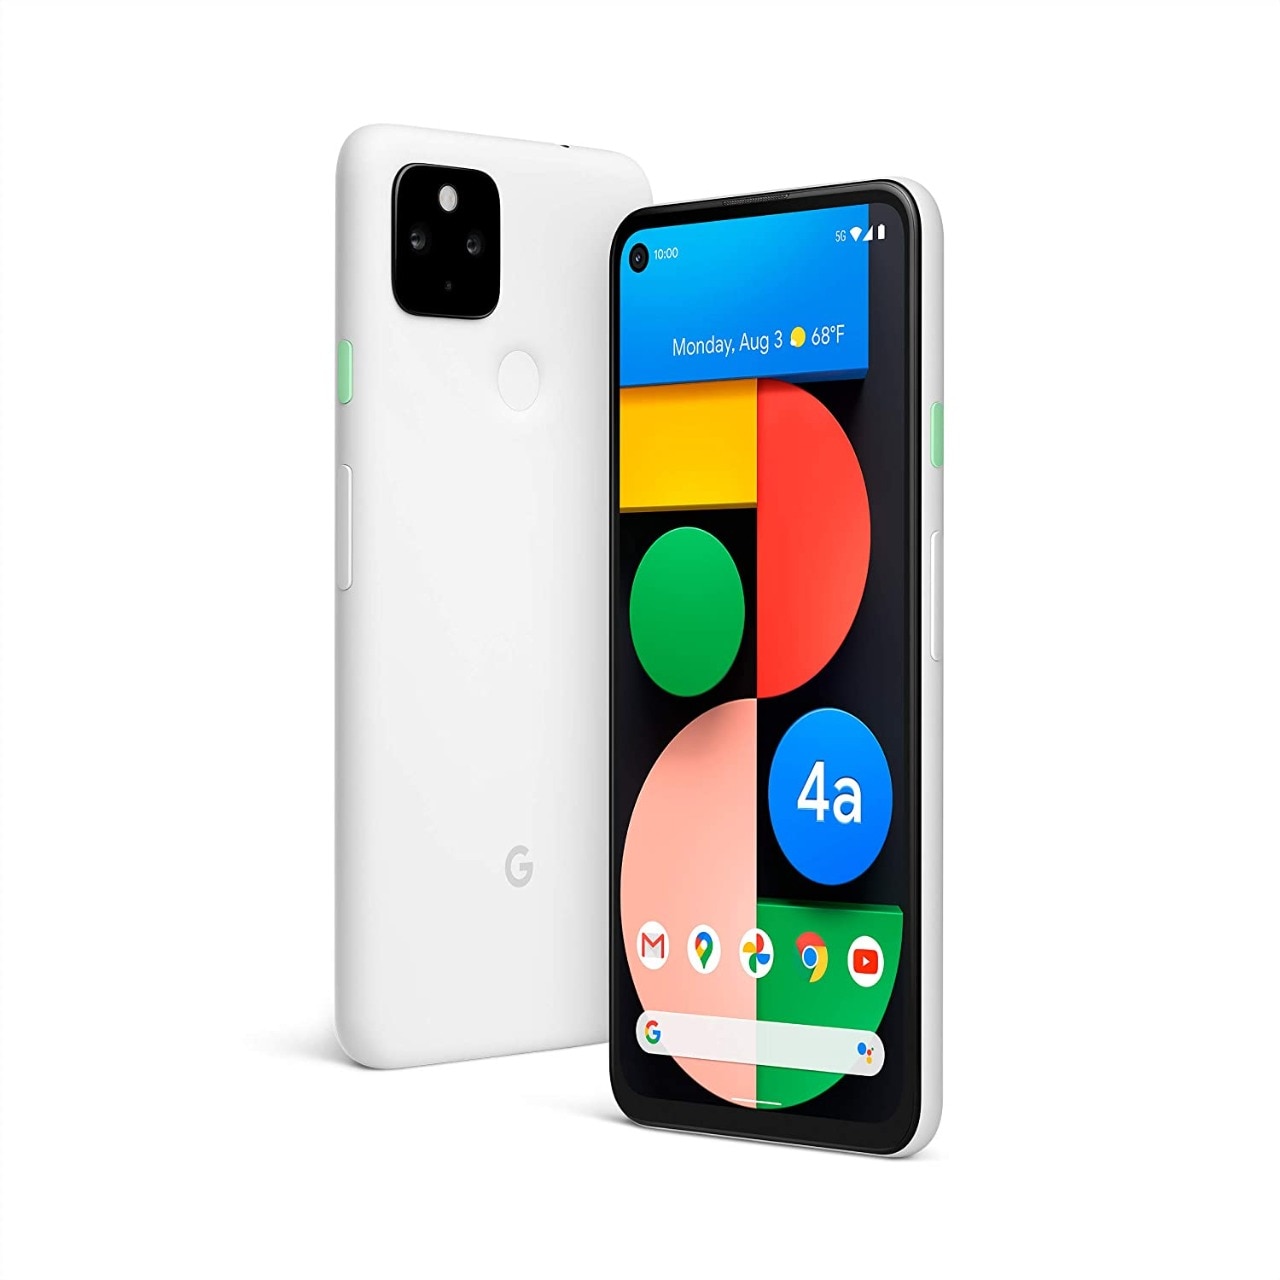 Amazon Festival Offer: Bumper sale on Google Pixel phones, Amazon is getting discounts on every model